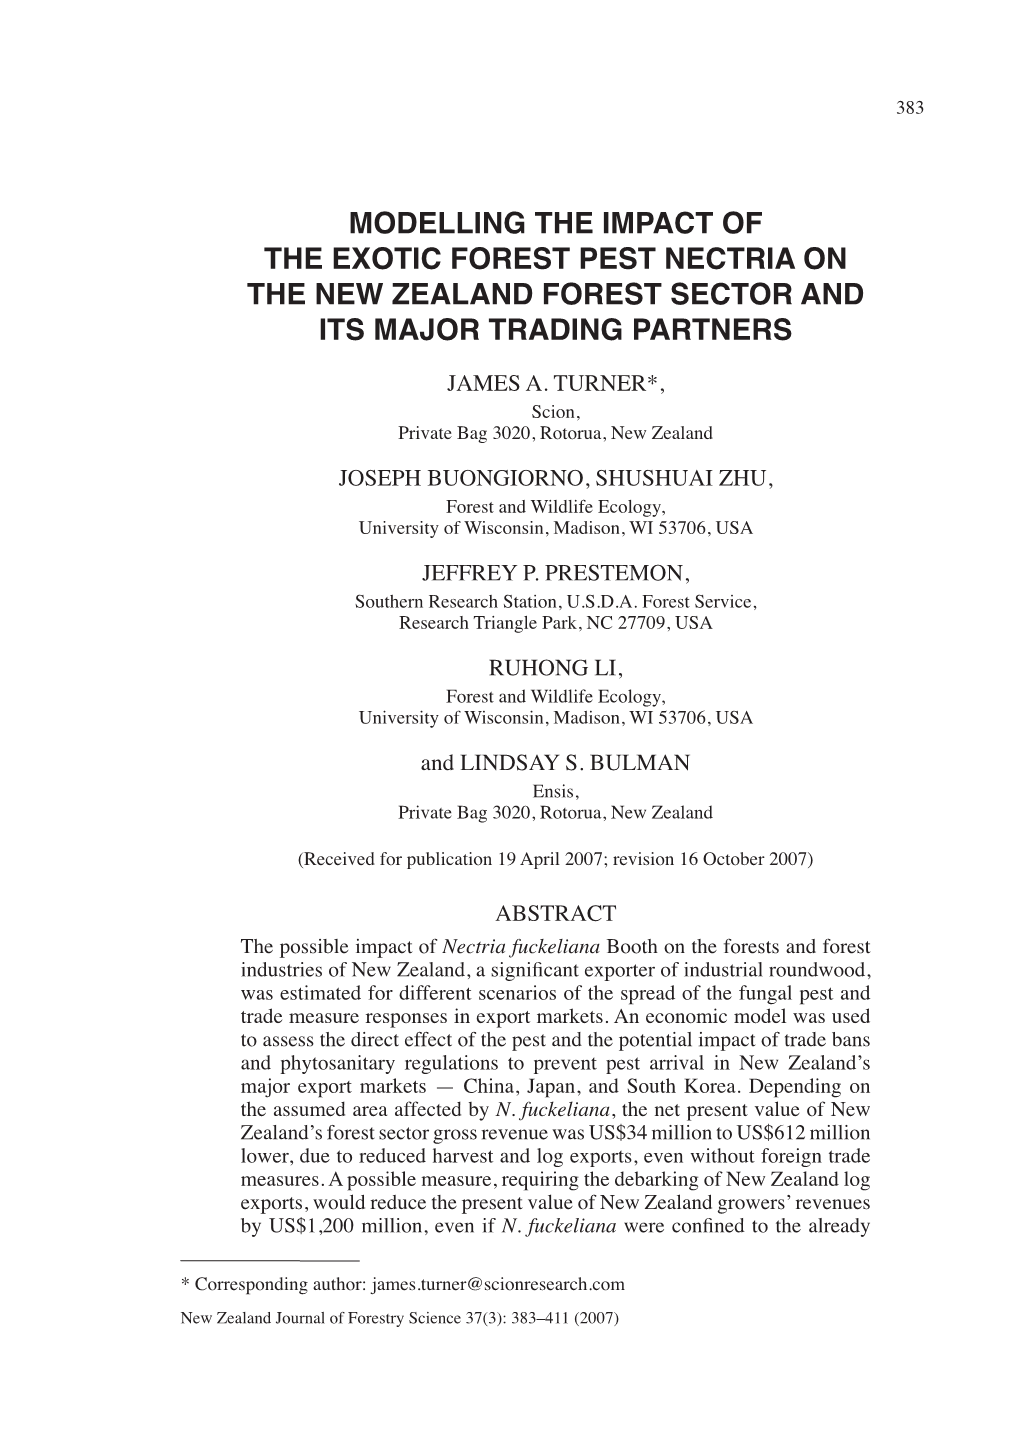 Modelling the Impact of the Exotic Forest Pest Nectria on the New Zealand Forest Sector and Its Major Trading Partners